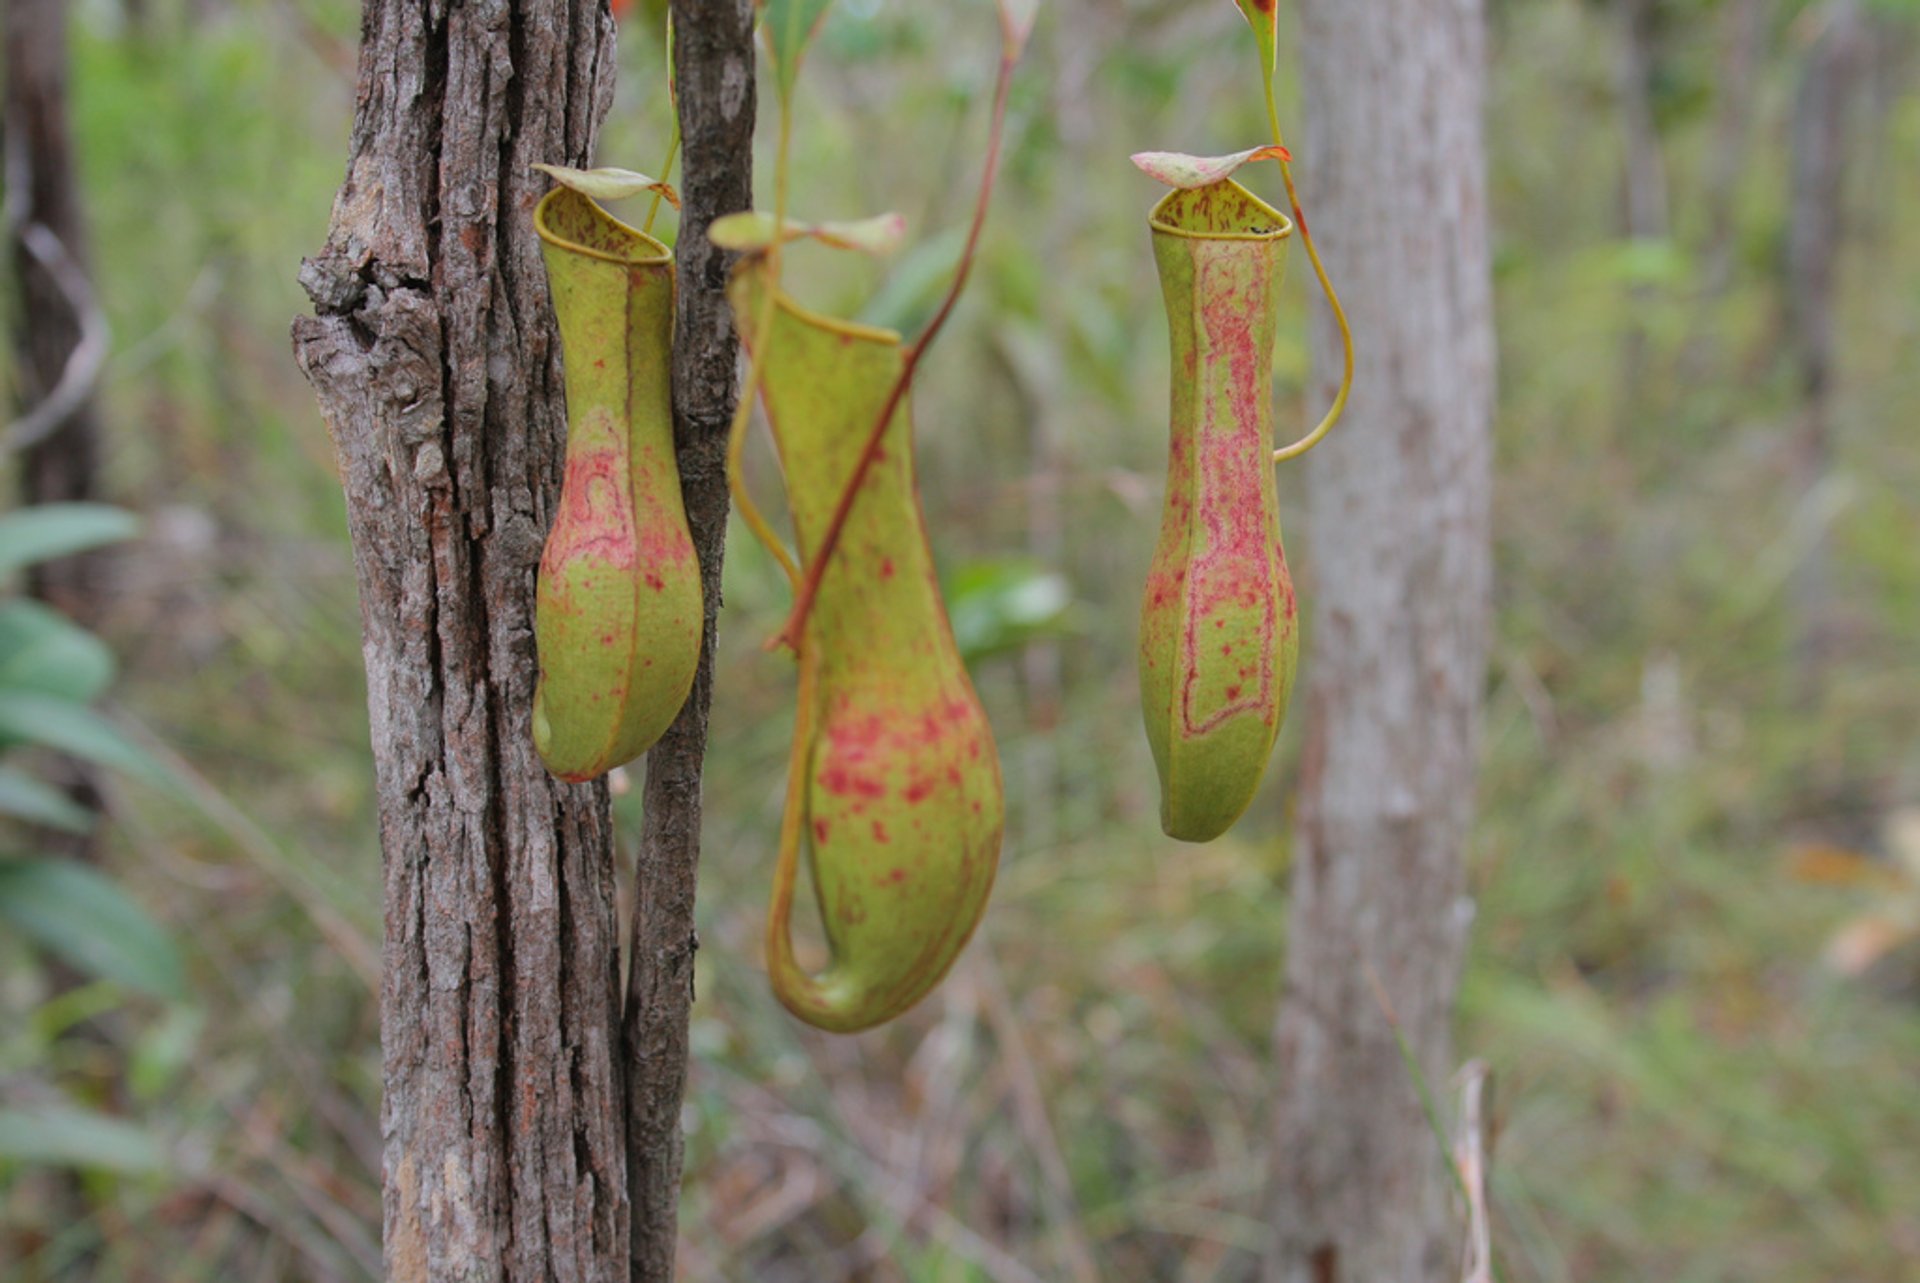 Pitcher Plant or Nepenthes